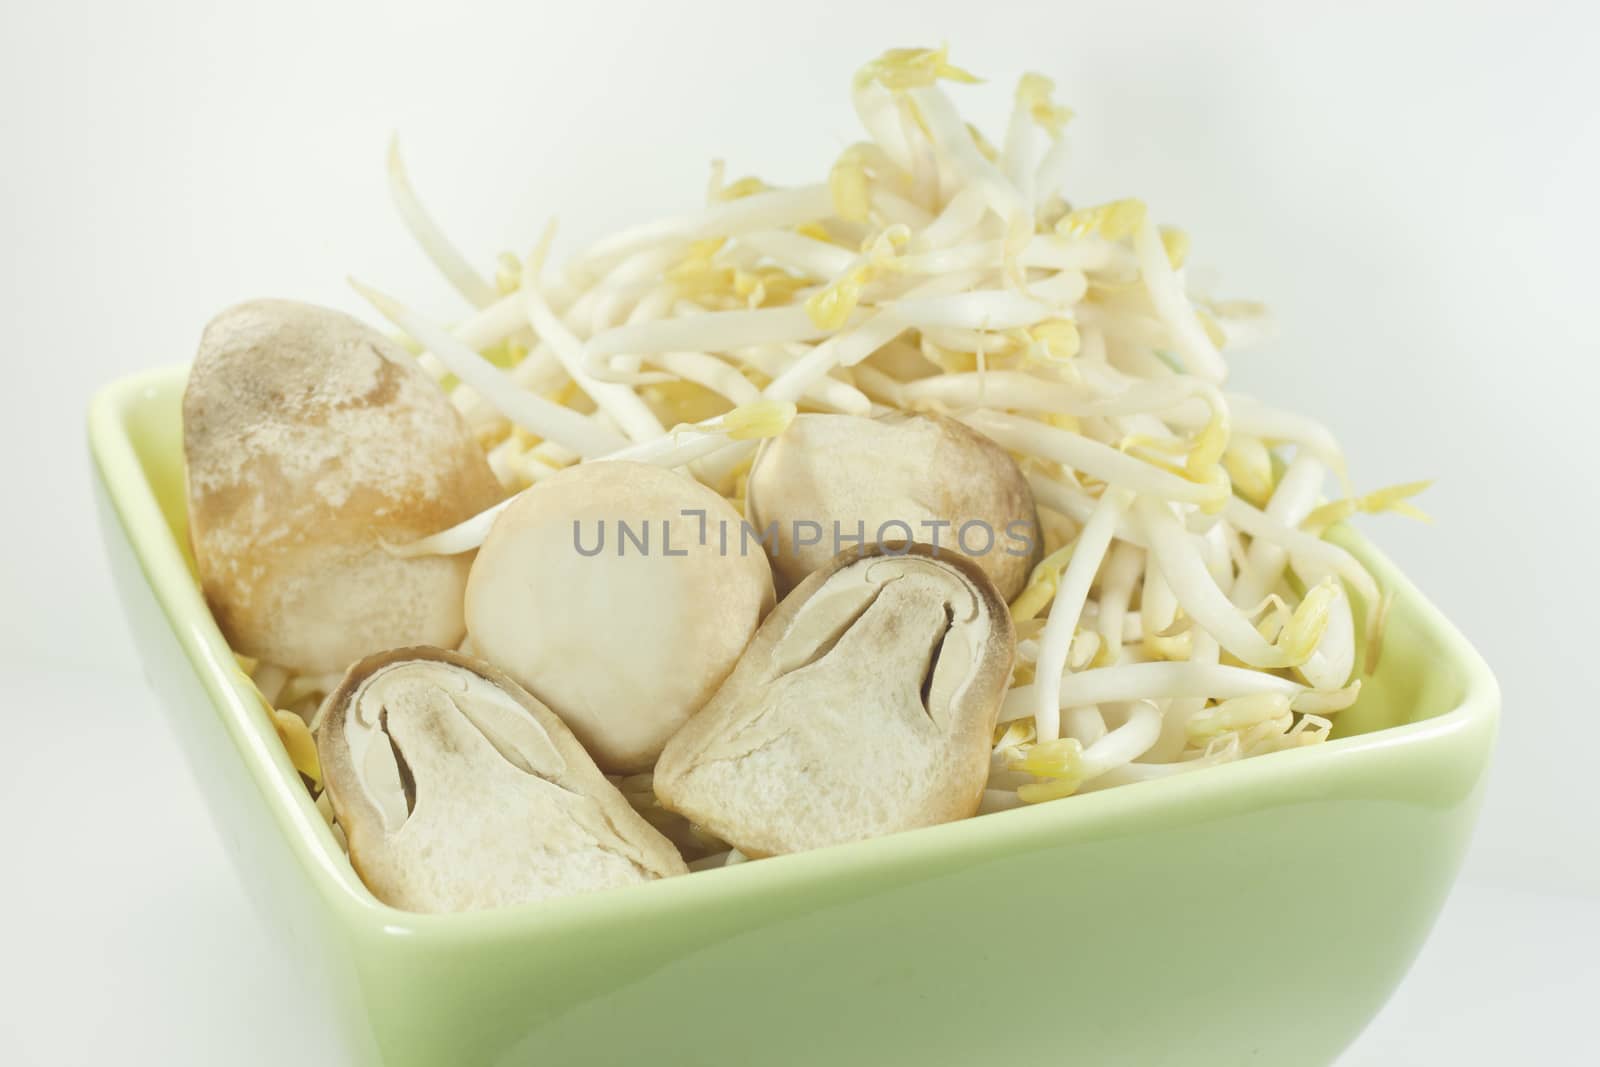 bean sprouts and straw mushrooms by audfriday13